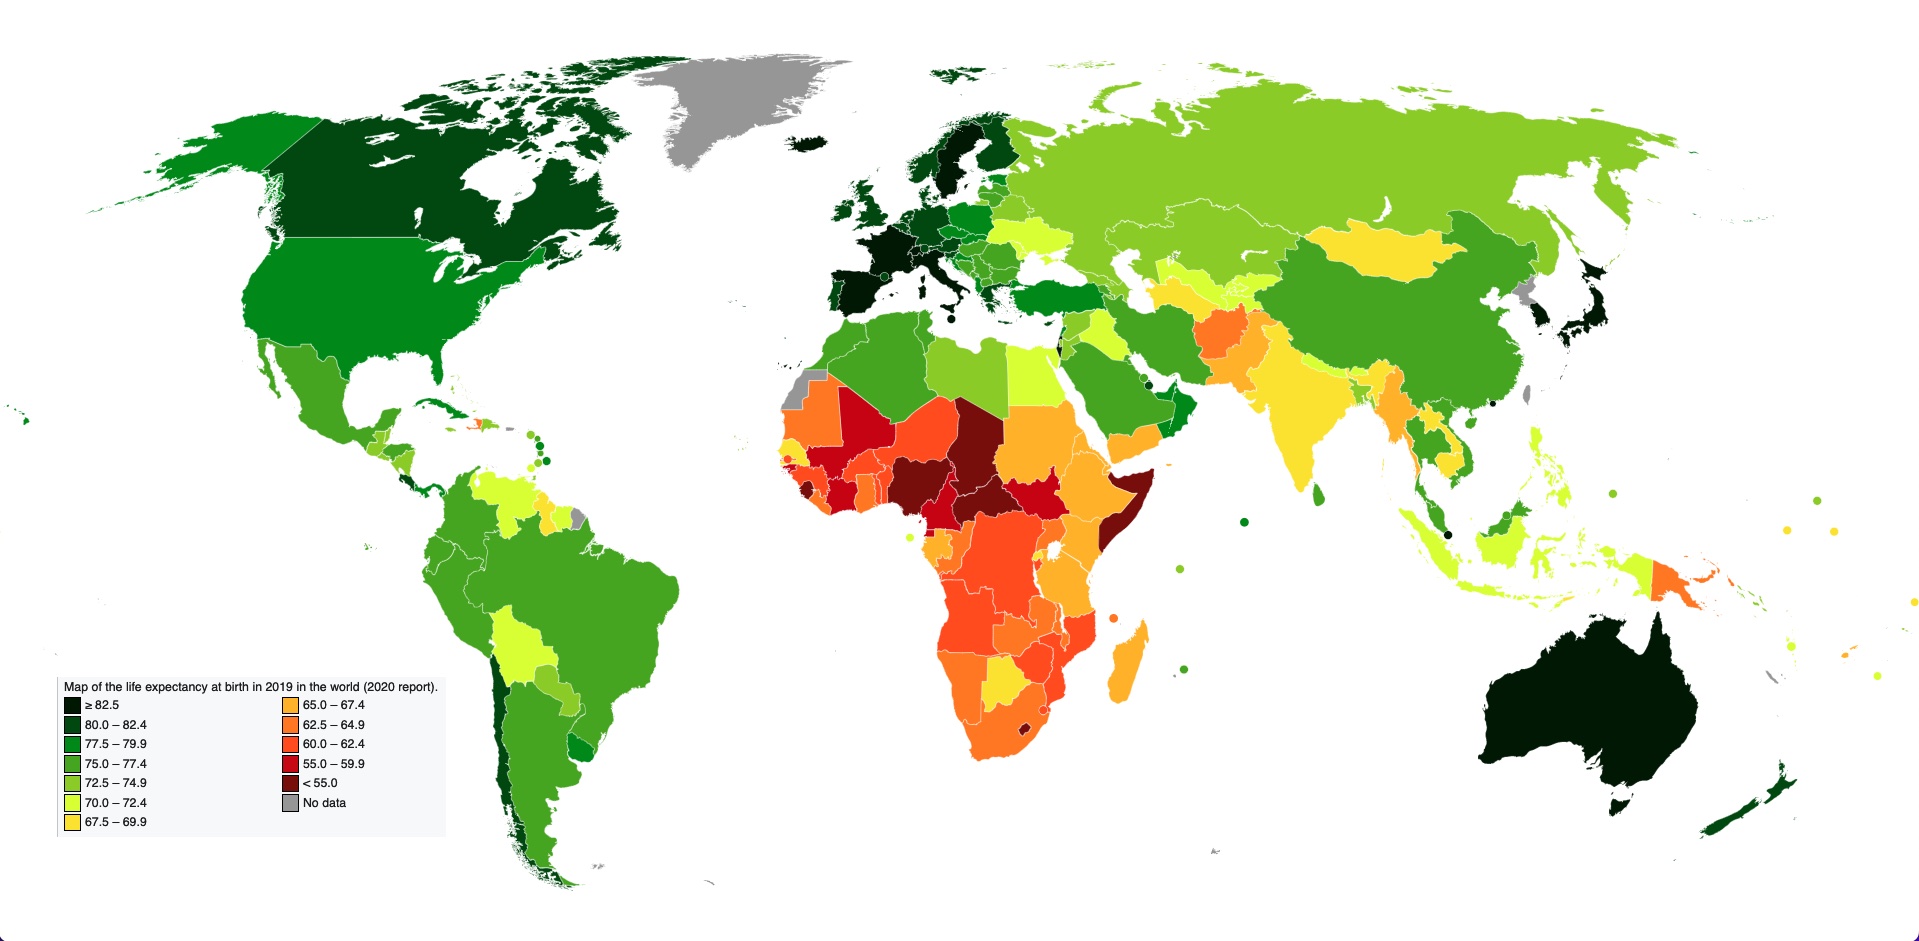 Map of the life expectancy at birth in 2019 in the world (2020 report)